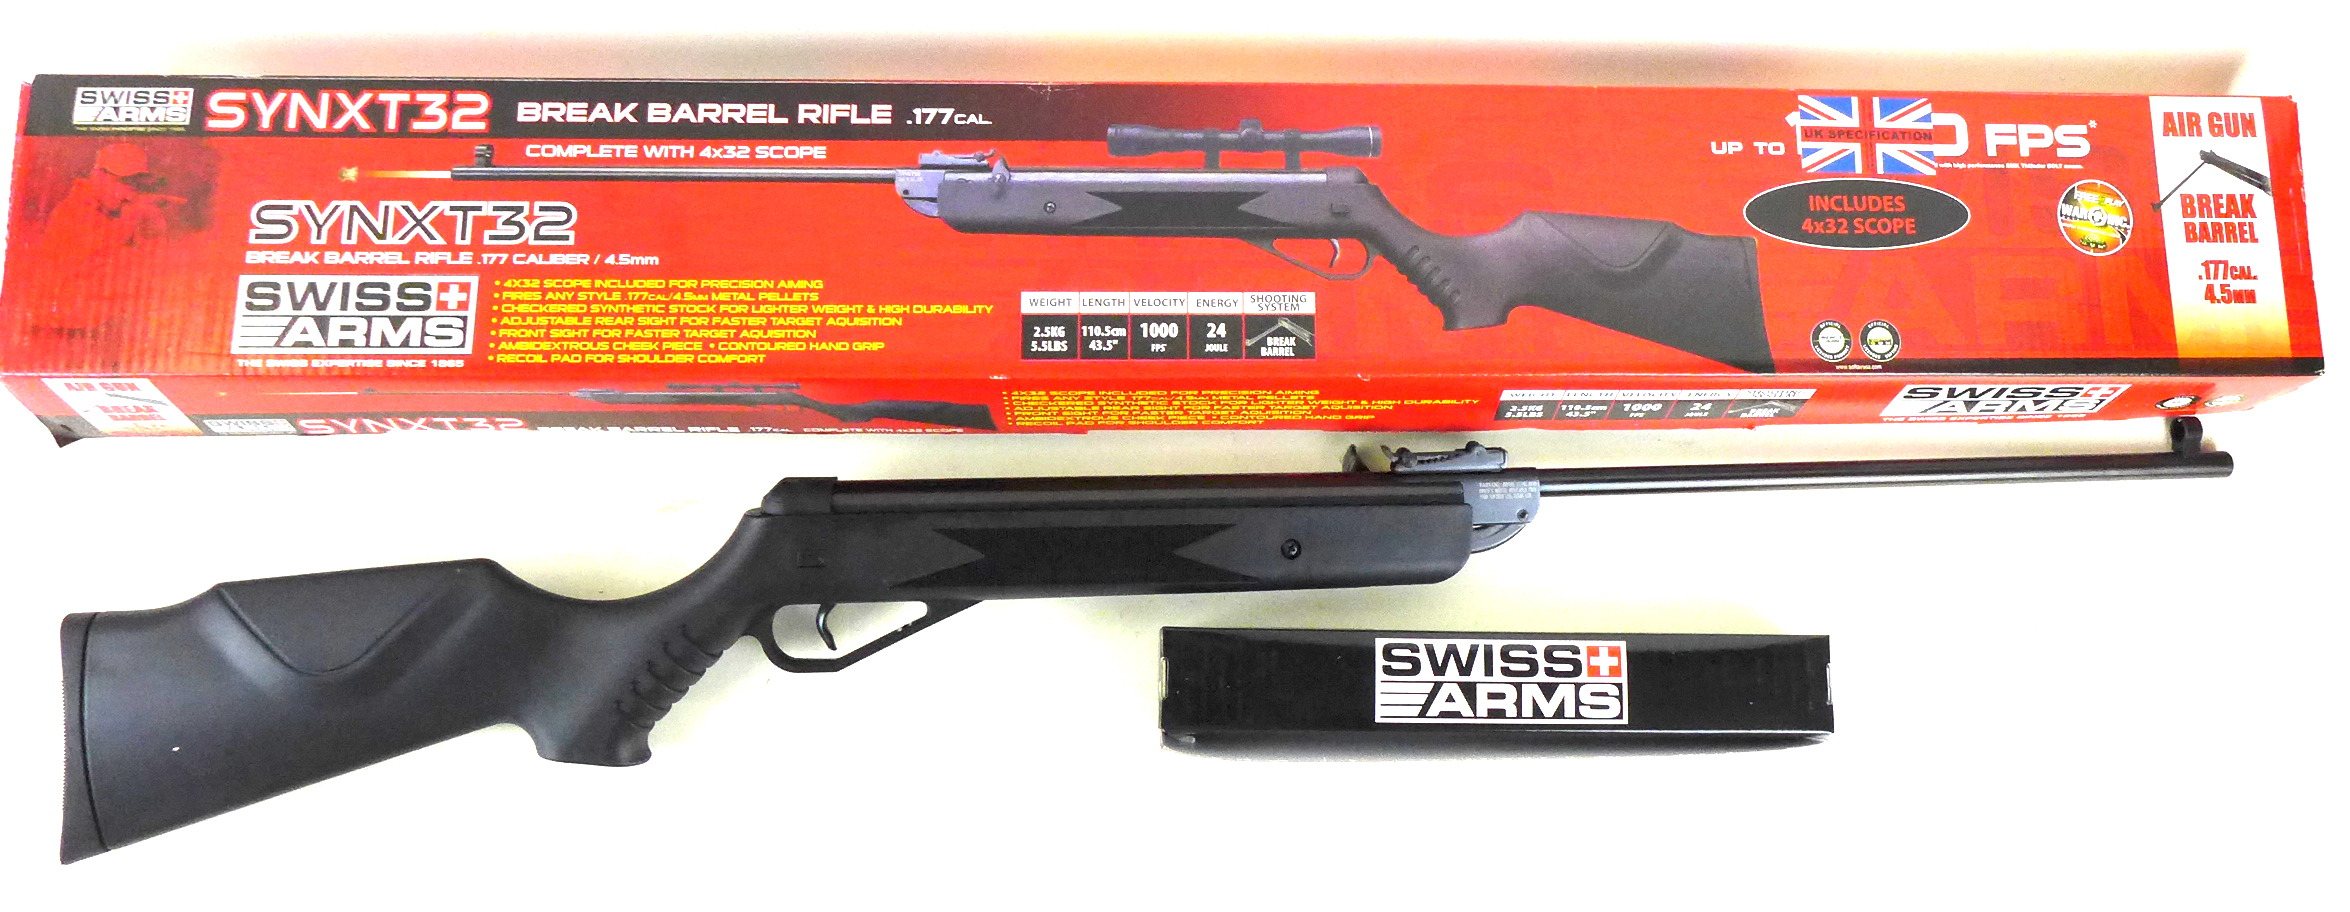 * A brand new boxed Swiss Arms Synxt 32 .